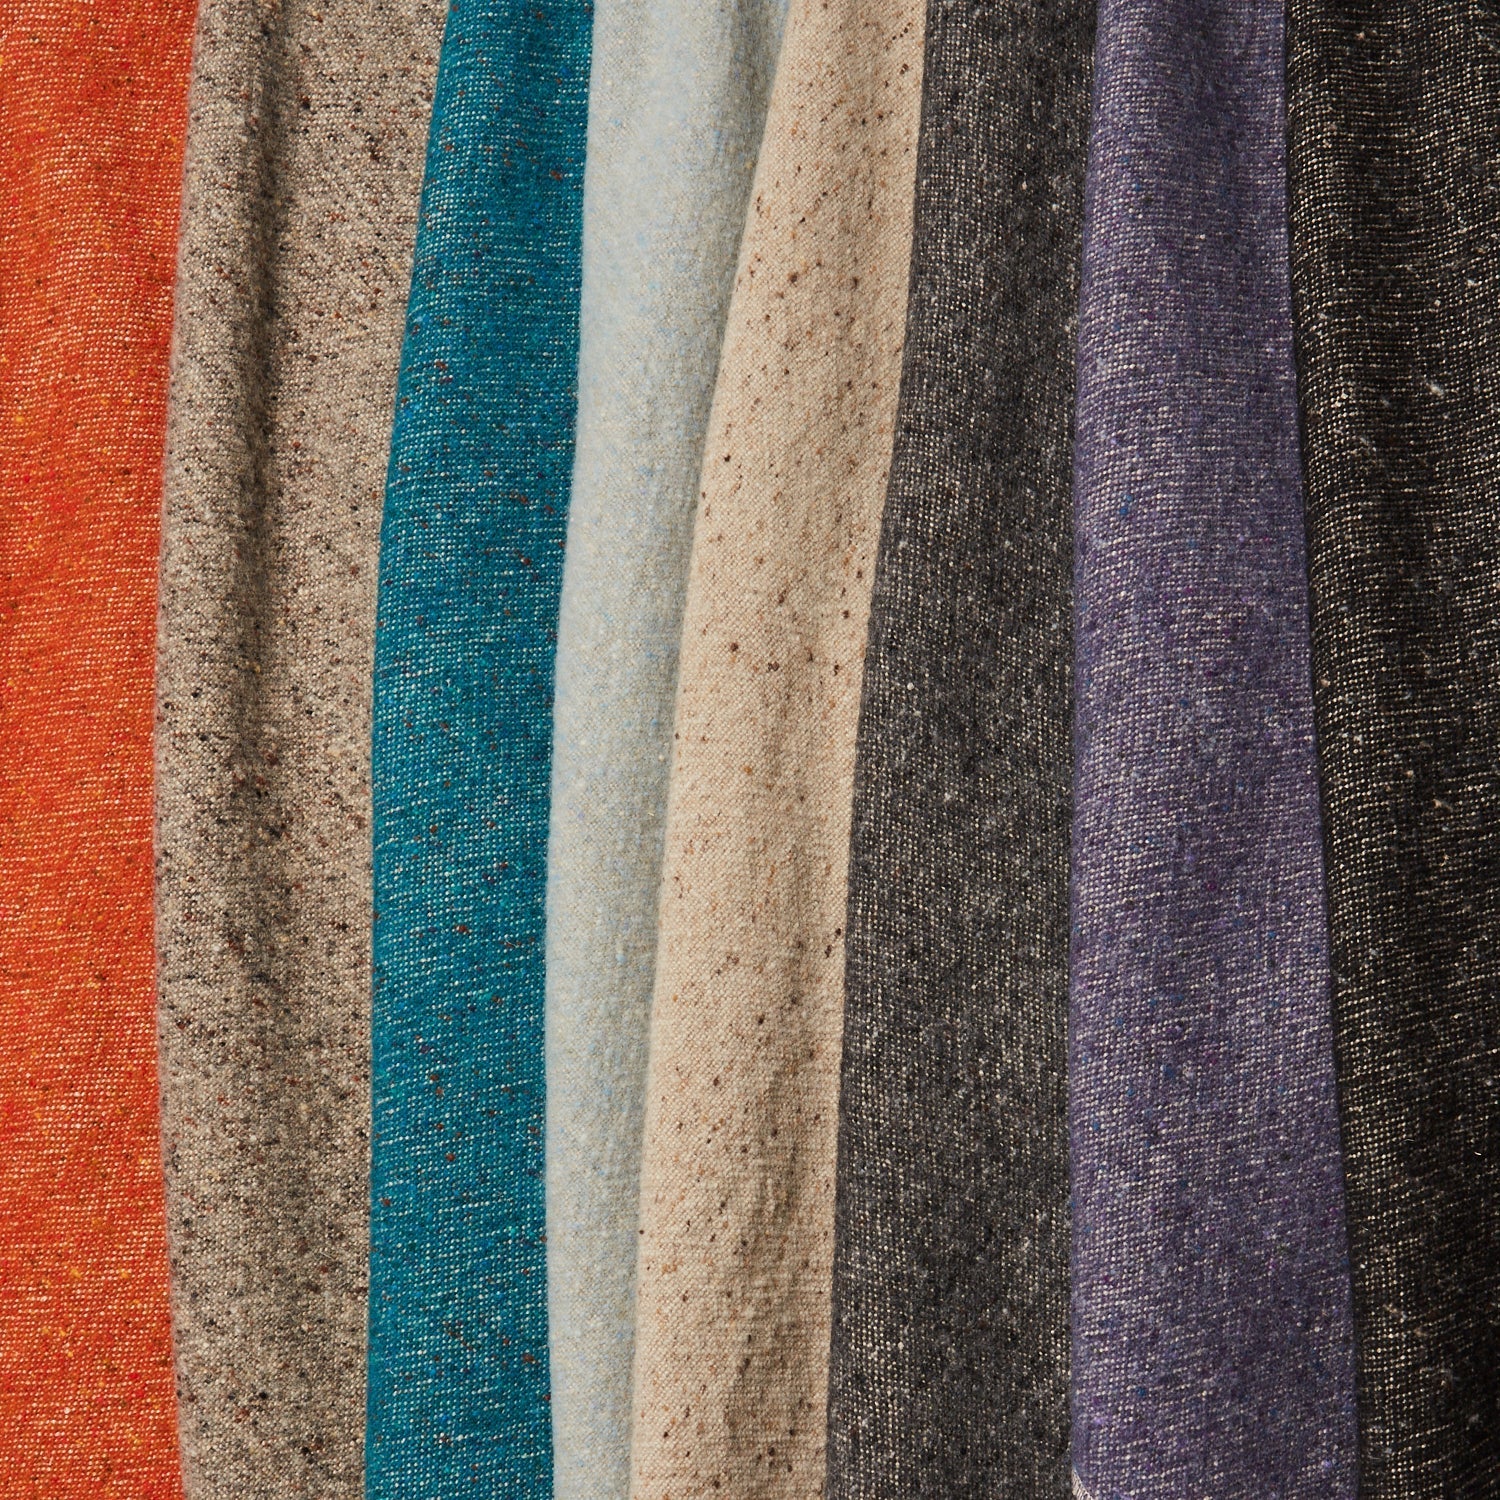 A row of folded linen-wool swatches in a variety of flecked colorways including tans, grays, reds and purples.